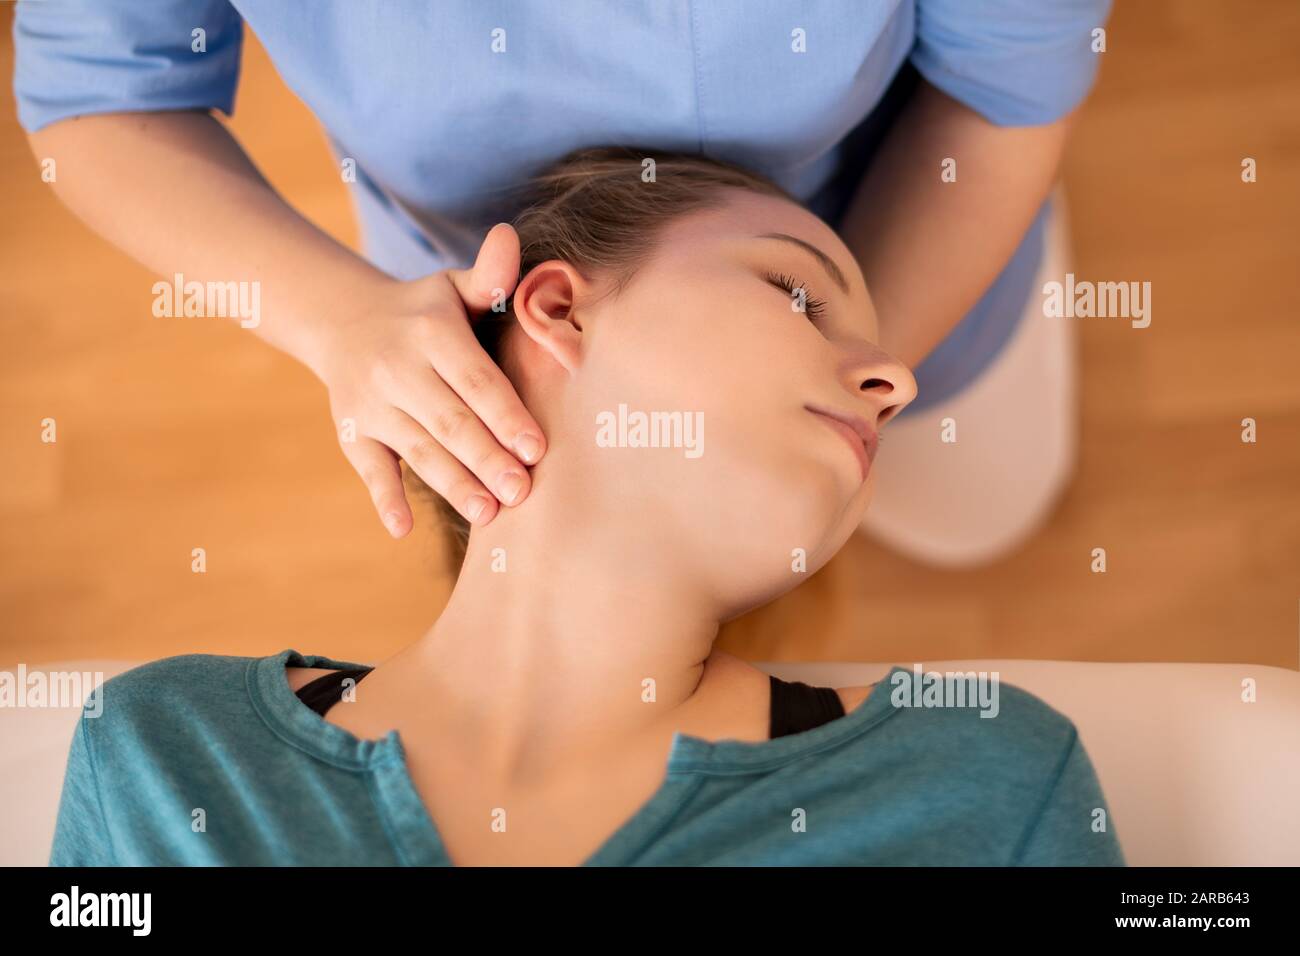 Female physiotherapist or a chiropractor adjusting patients neck. Physiotherapy, rehabilitation concept. Top view close up. Stock Photo